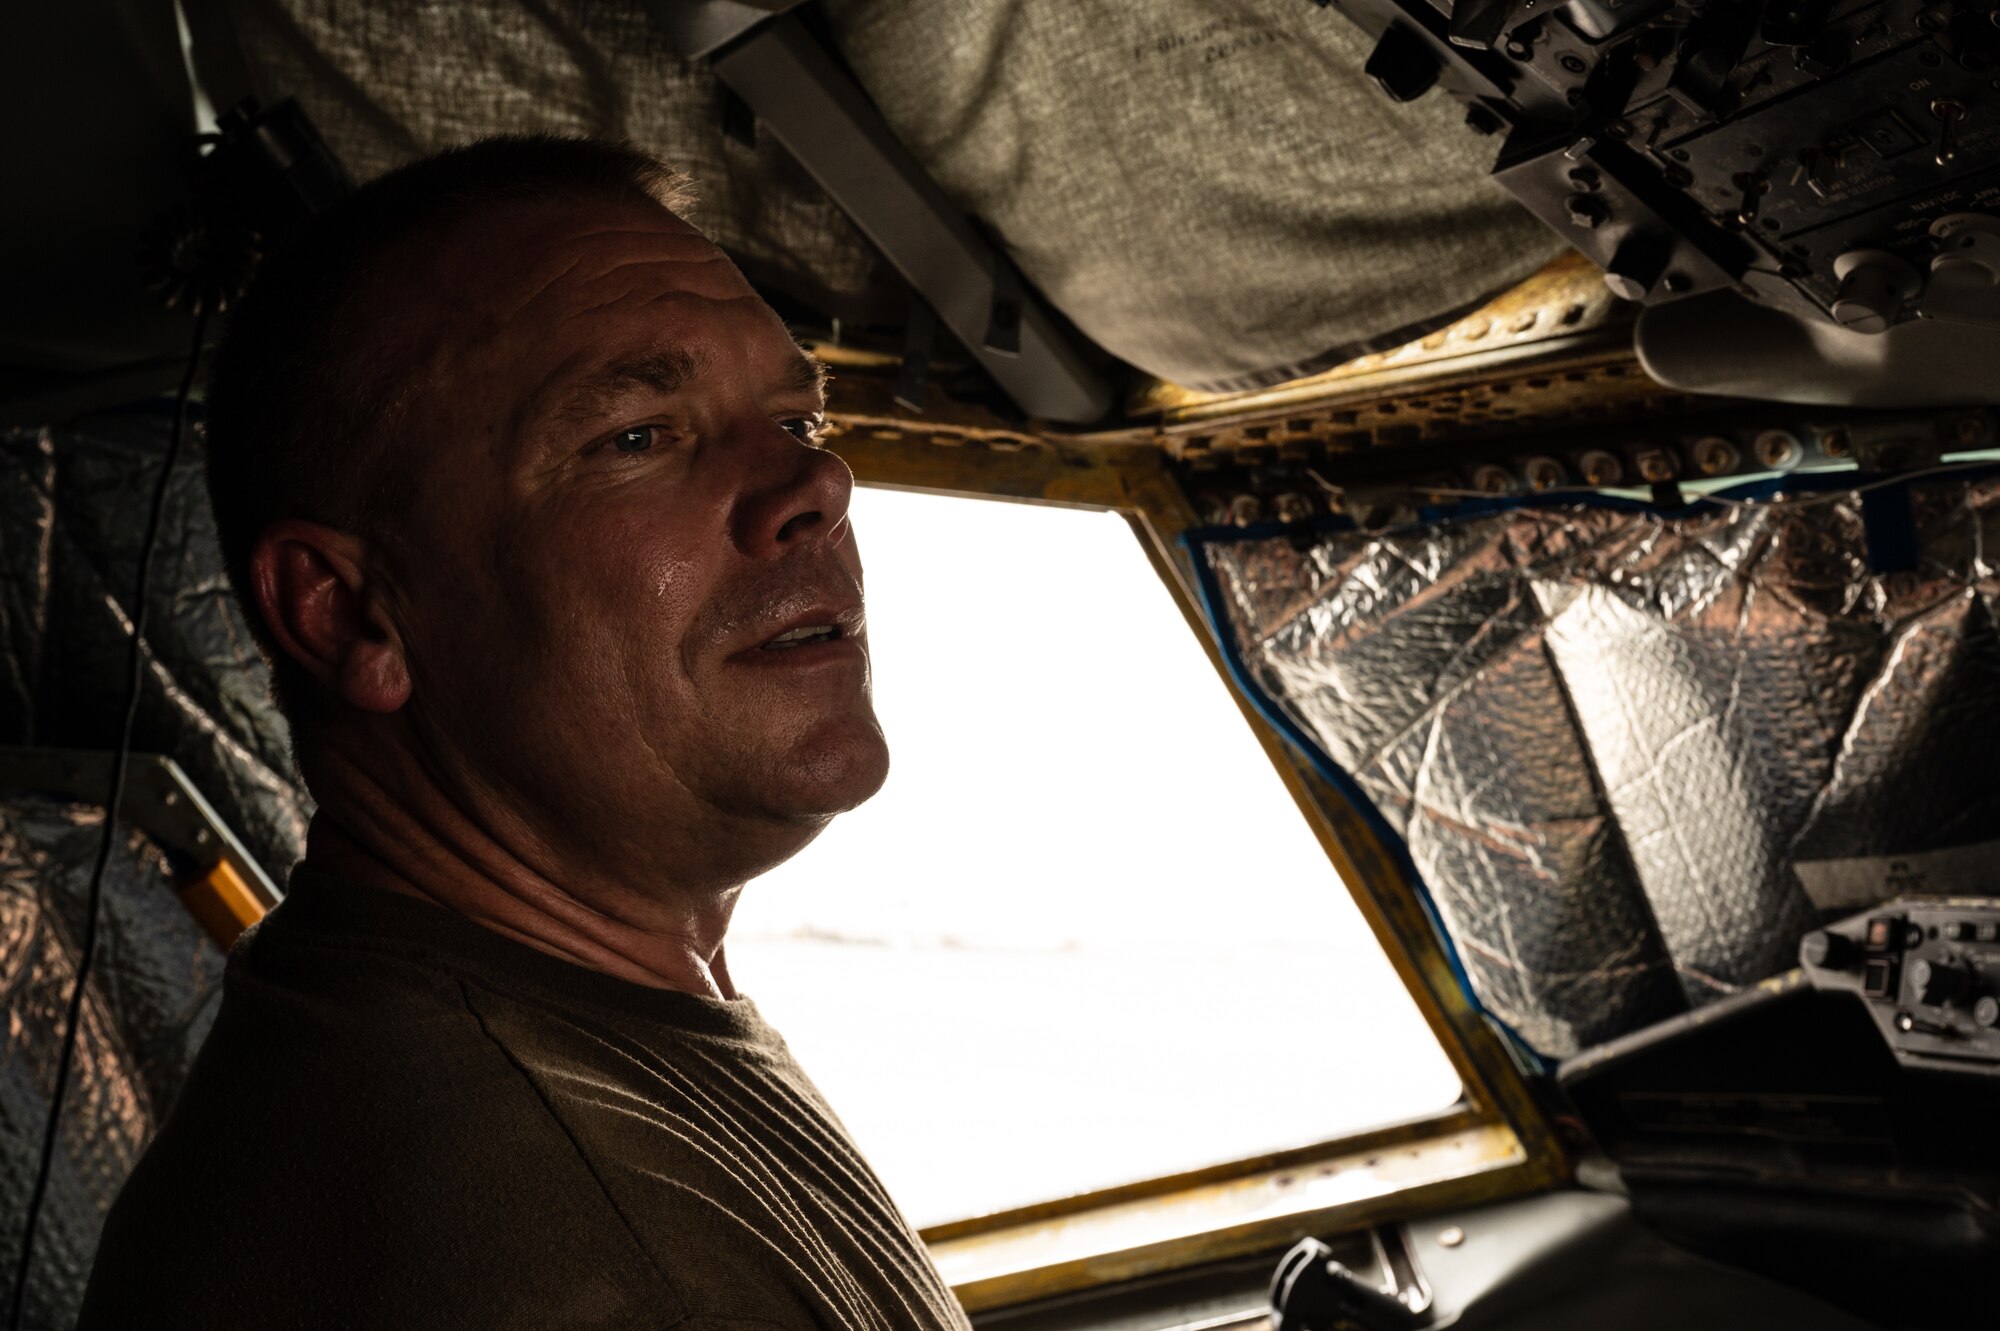 U.S. Air Force Col. Randy D. Schwinler, Commander 379th Expeditionary Maintenance Group, Al Udeid Air Base, Qatar, looks through a window to see hand signals from a teammate while he conducts a pre-flight check from the cockpit of a KC-135 Stratotanker, July 9, 2022. Schwinler has been working KC-135 maintenance for 14 years and been in the maintenance field for 36 years. (U.S. Air Force photo by Staff Sgt. Dana Tourtellotte)